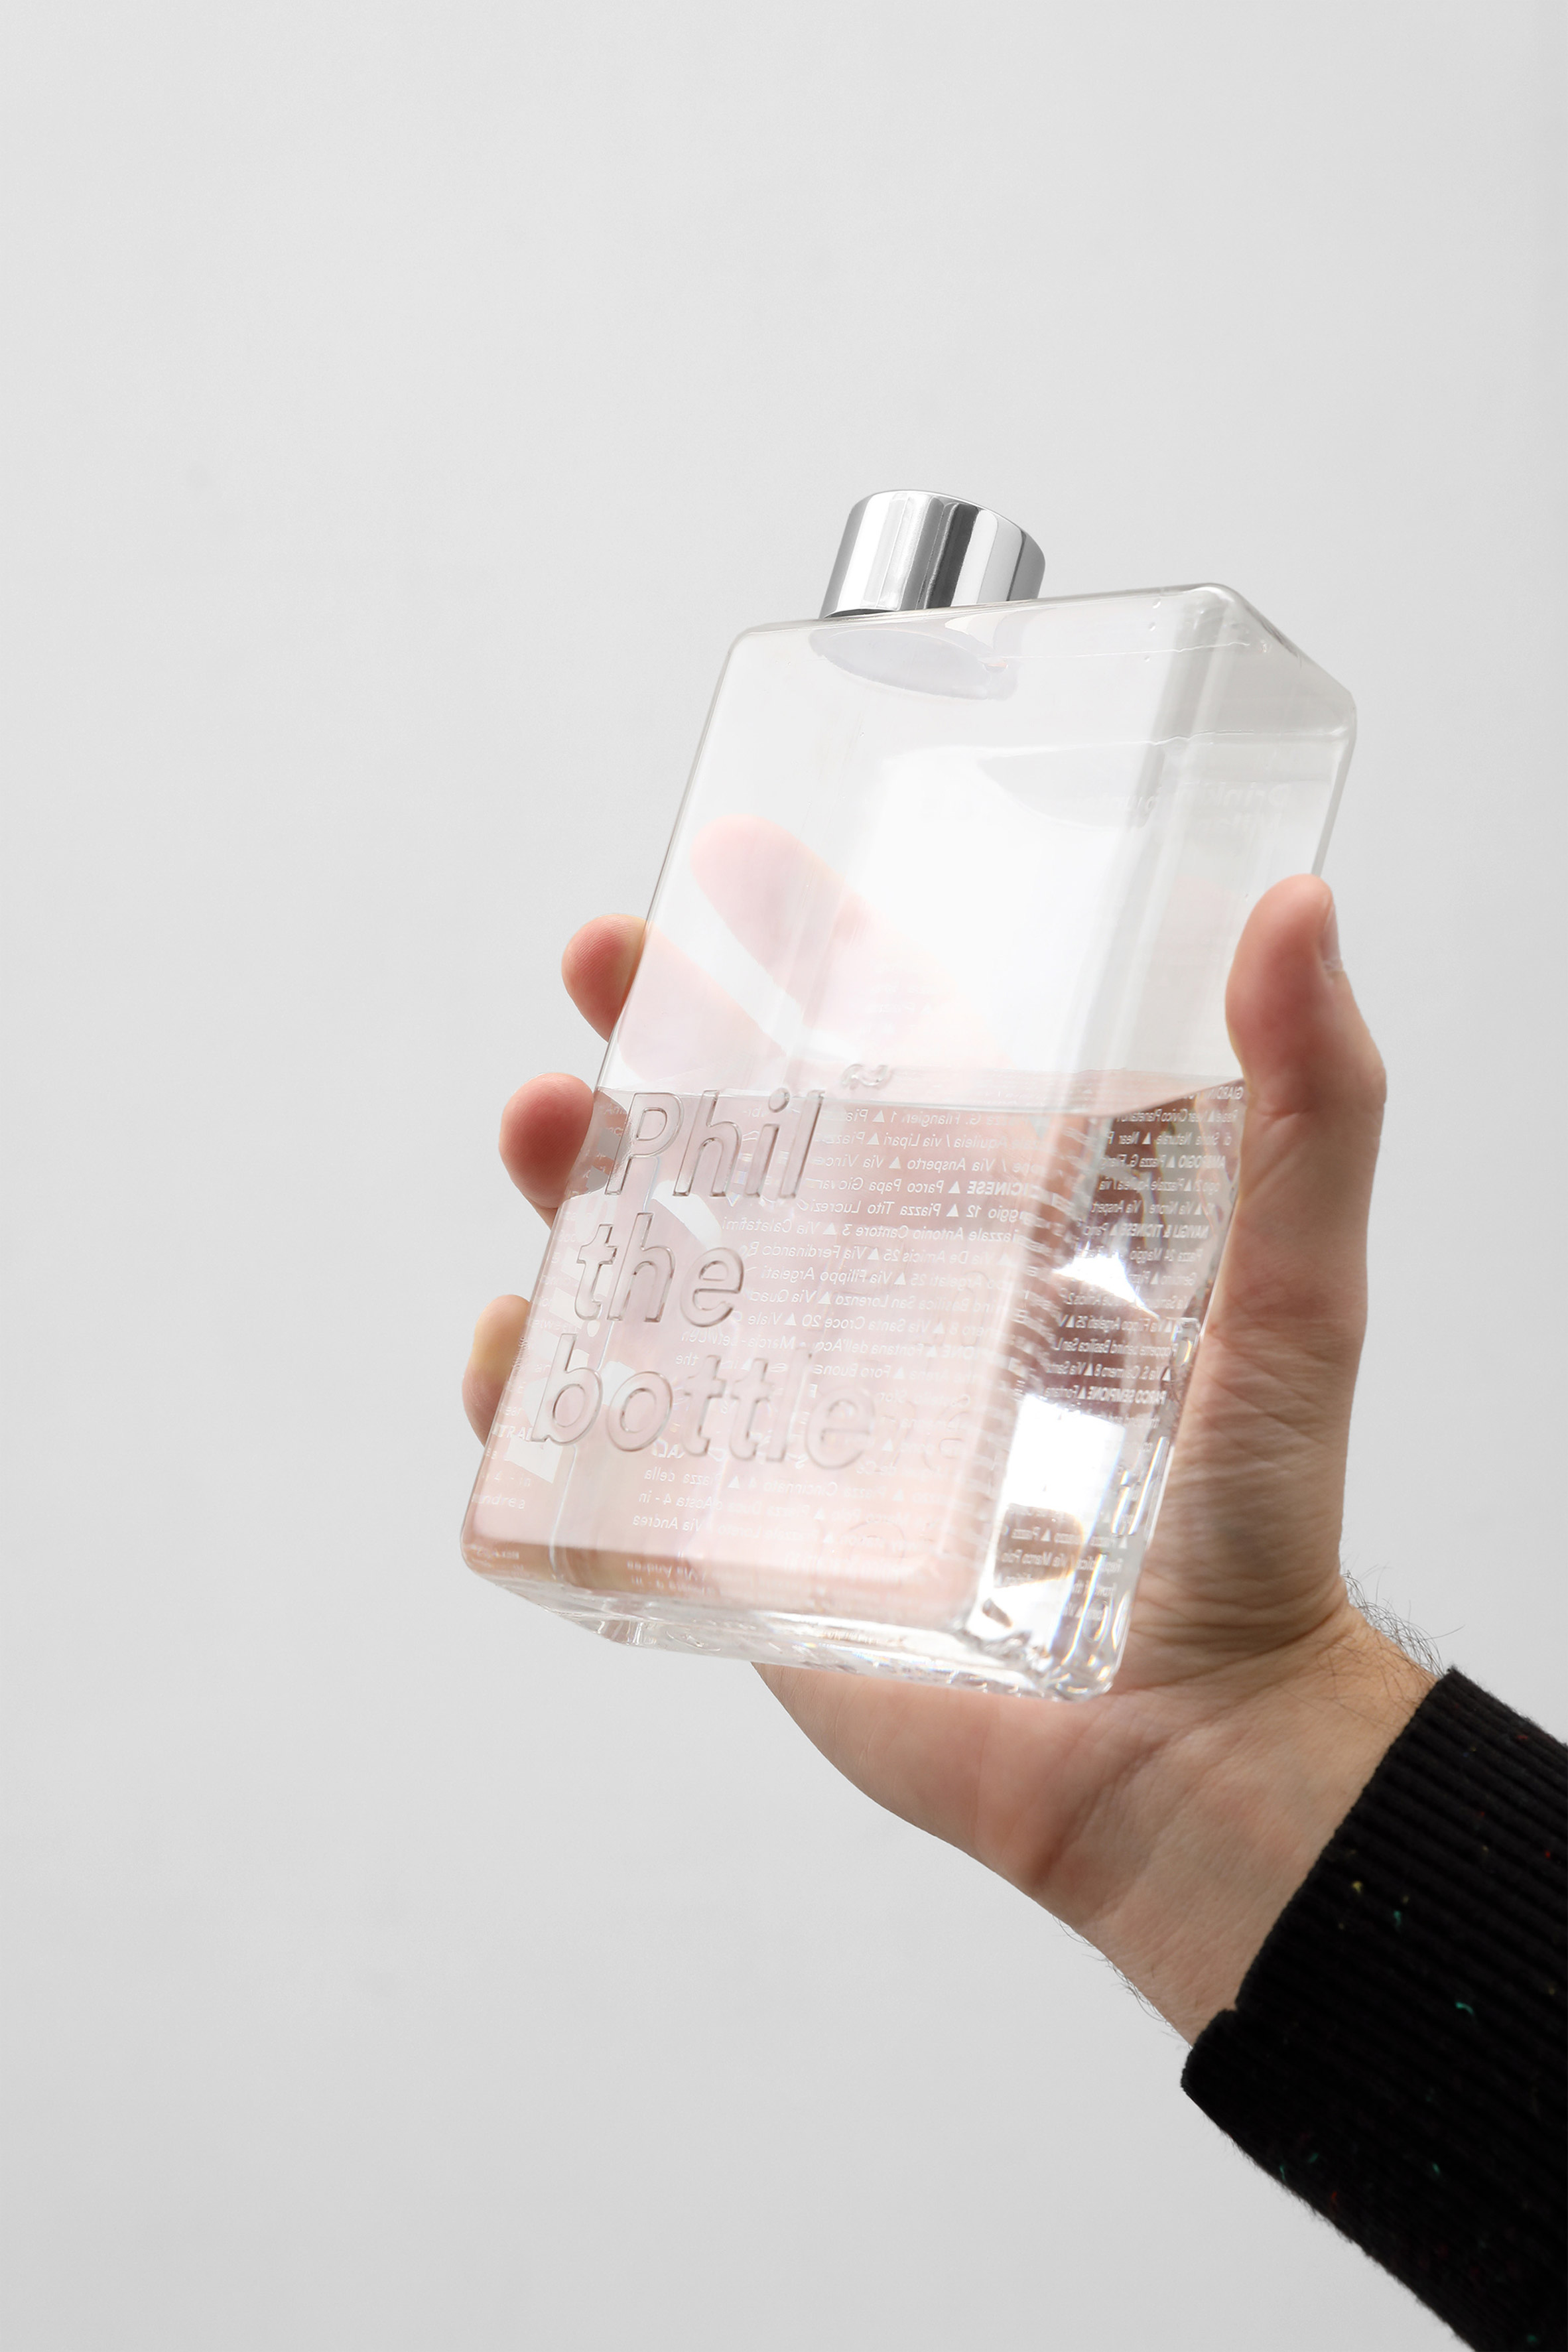 Emanuele Pizzolorusso designs refillable bottles that guide users towards water fountains